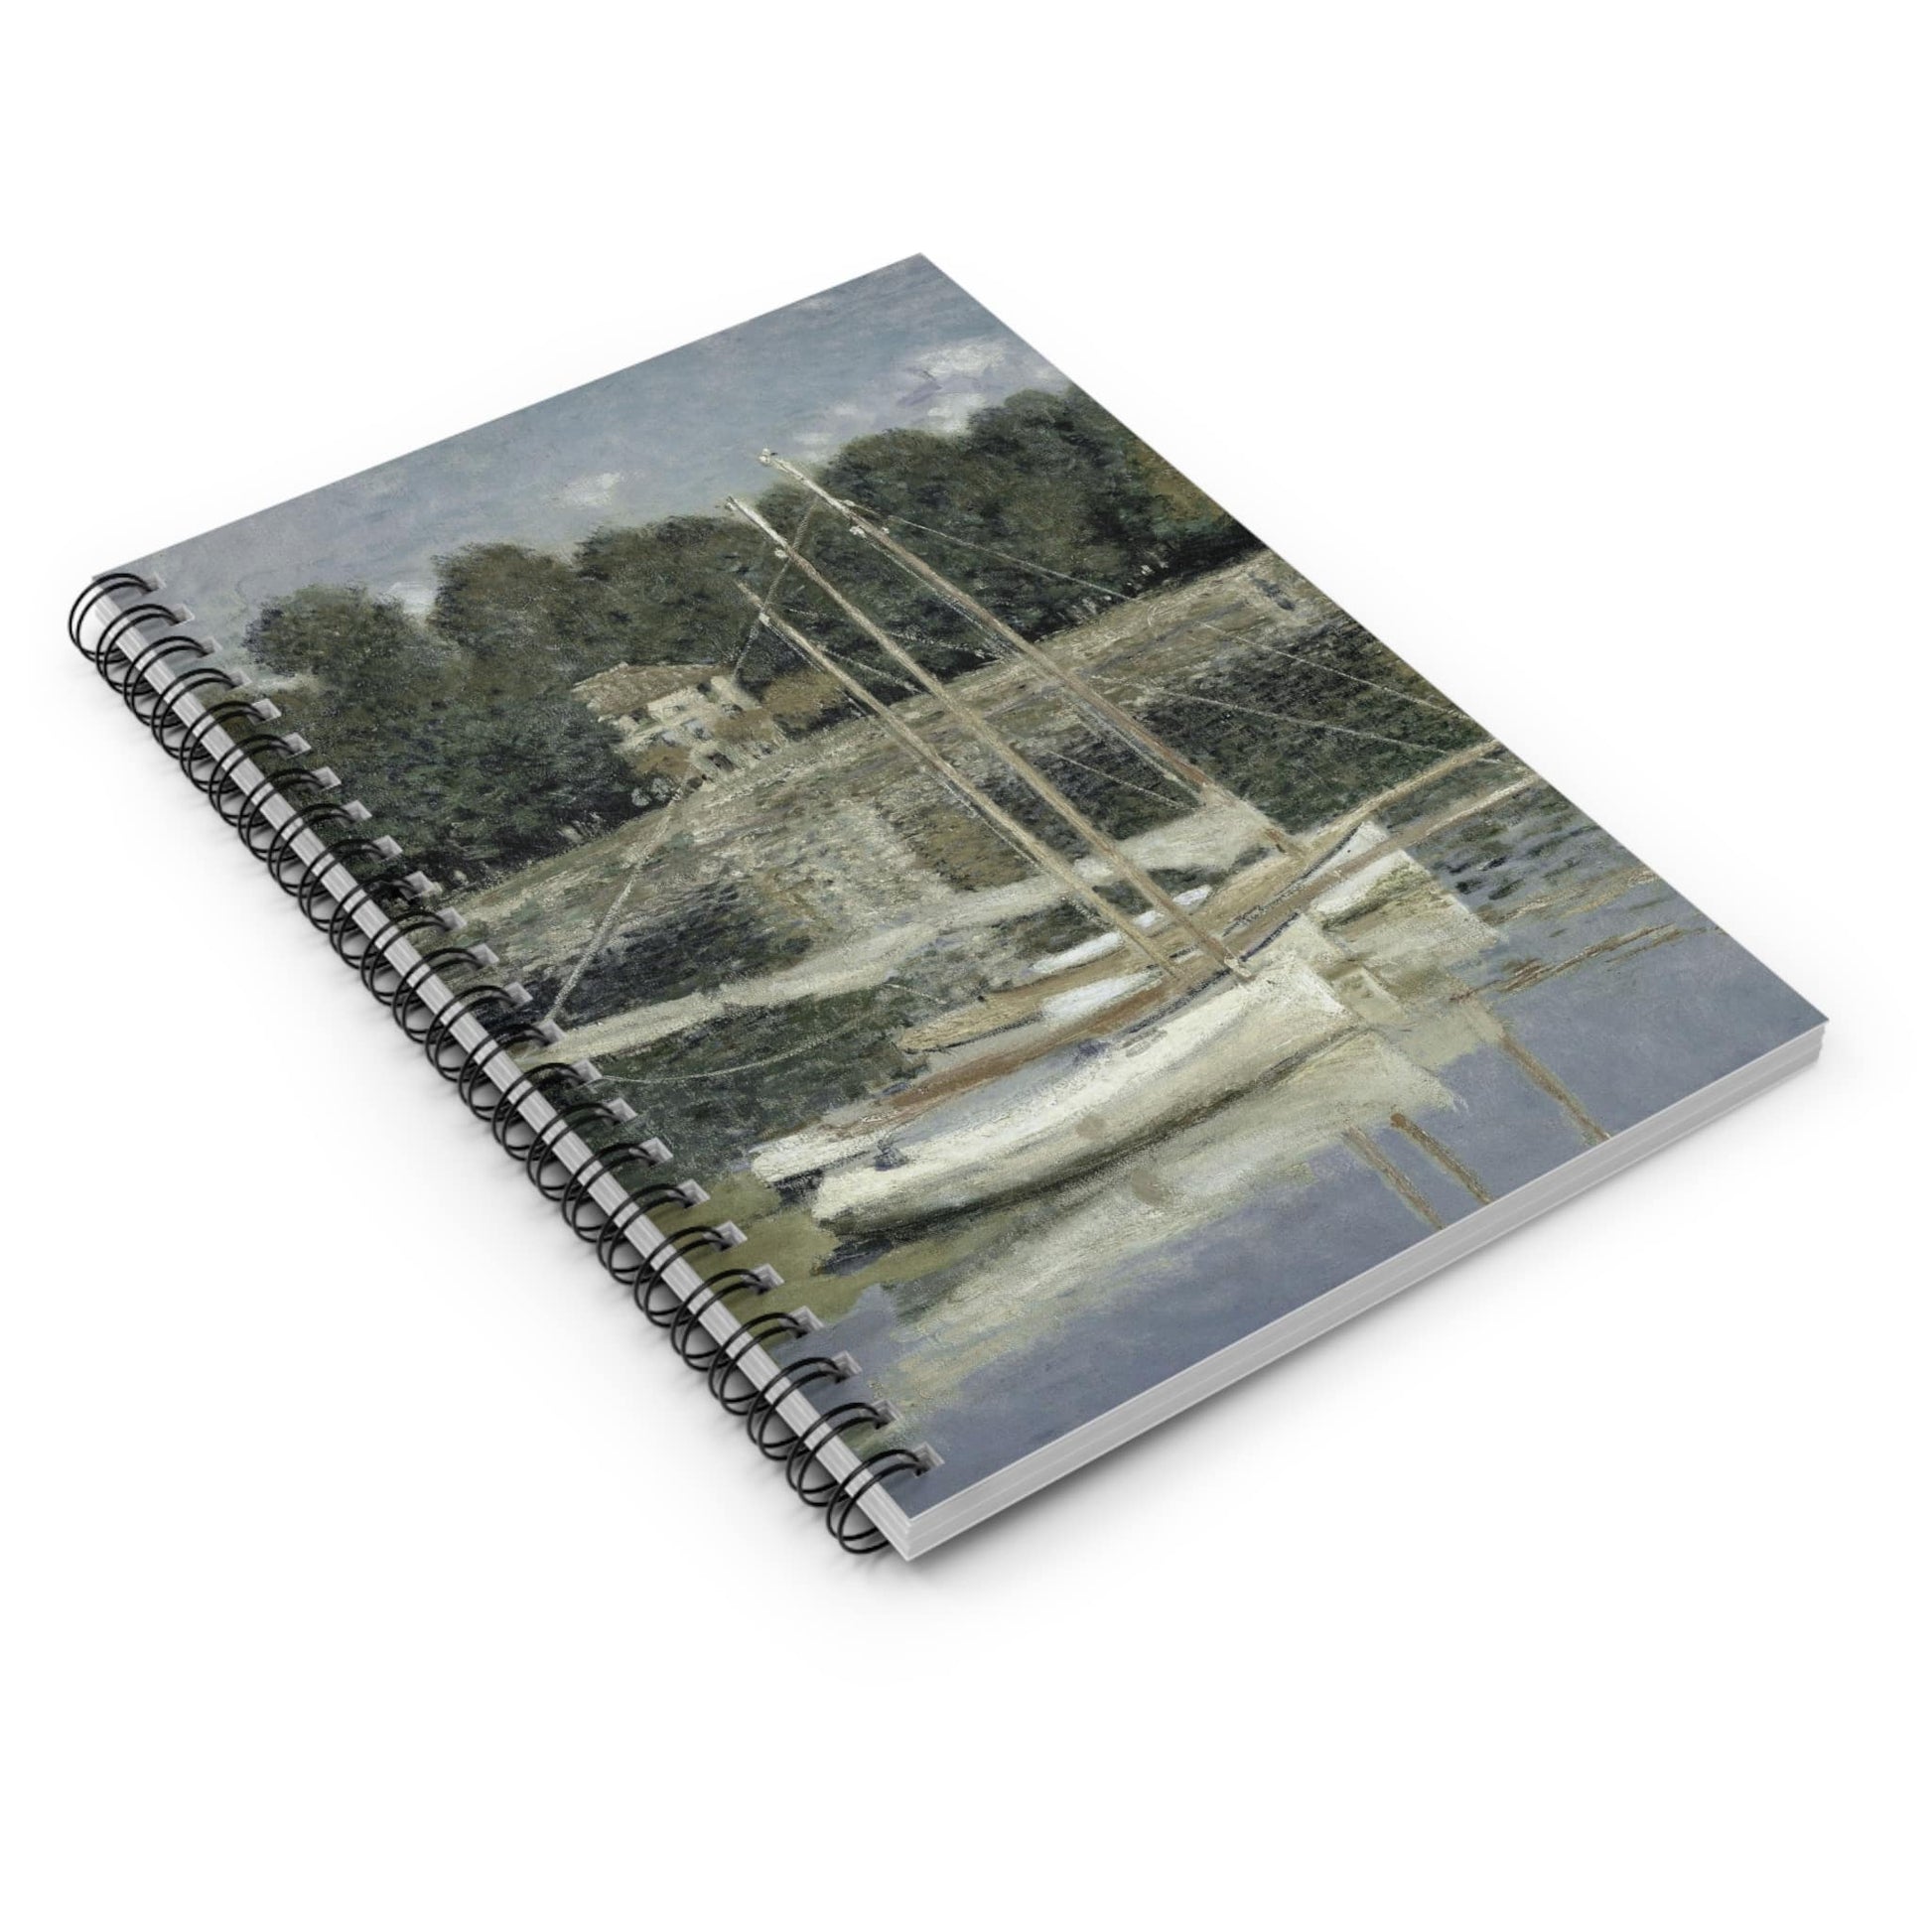 Peaceful River Spiral Notebook Laying Flat on White Surface